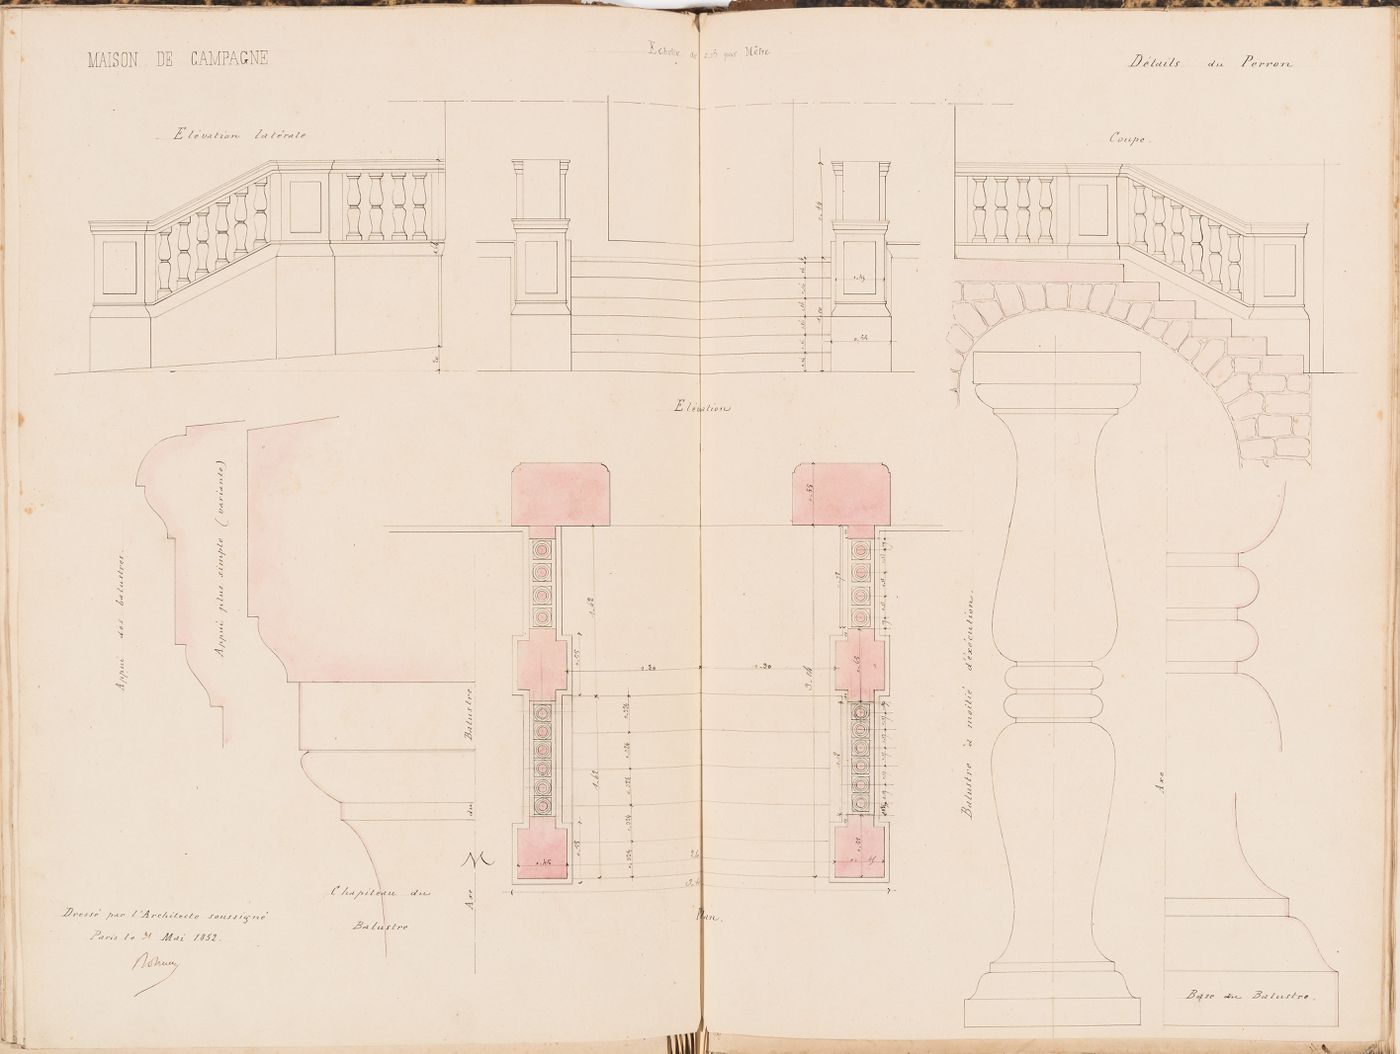 Plan, front and side elevations, details for the baluster, and longitudinal section for the "perron" for a country house for Madame de Lescure, Royan